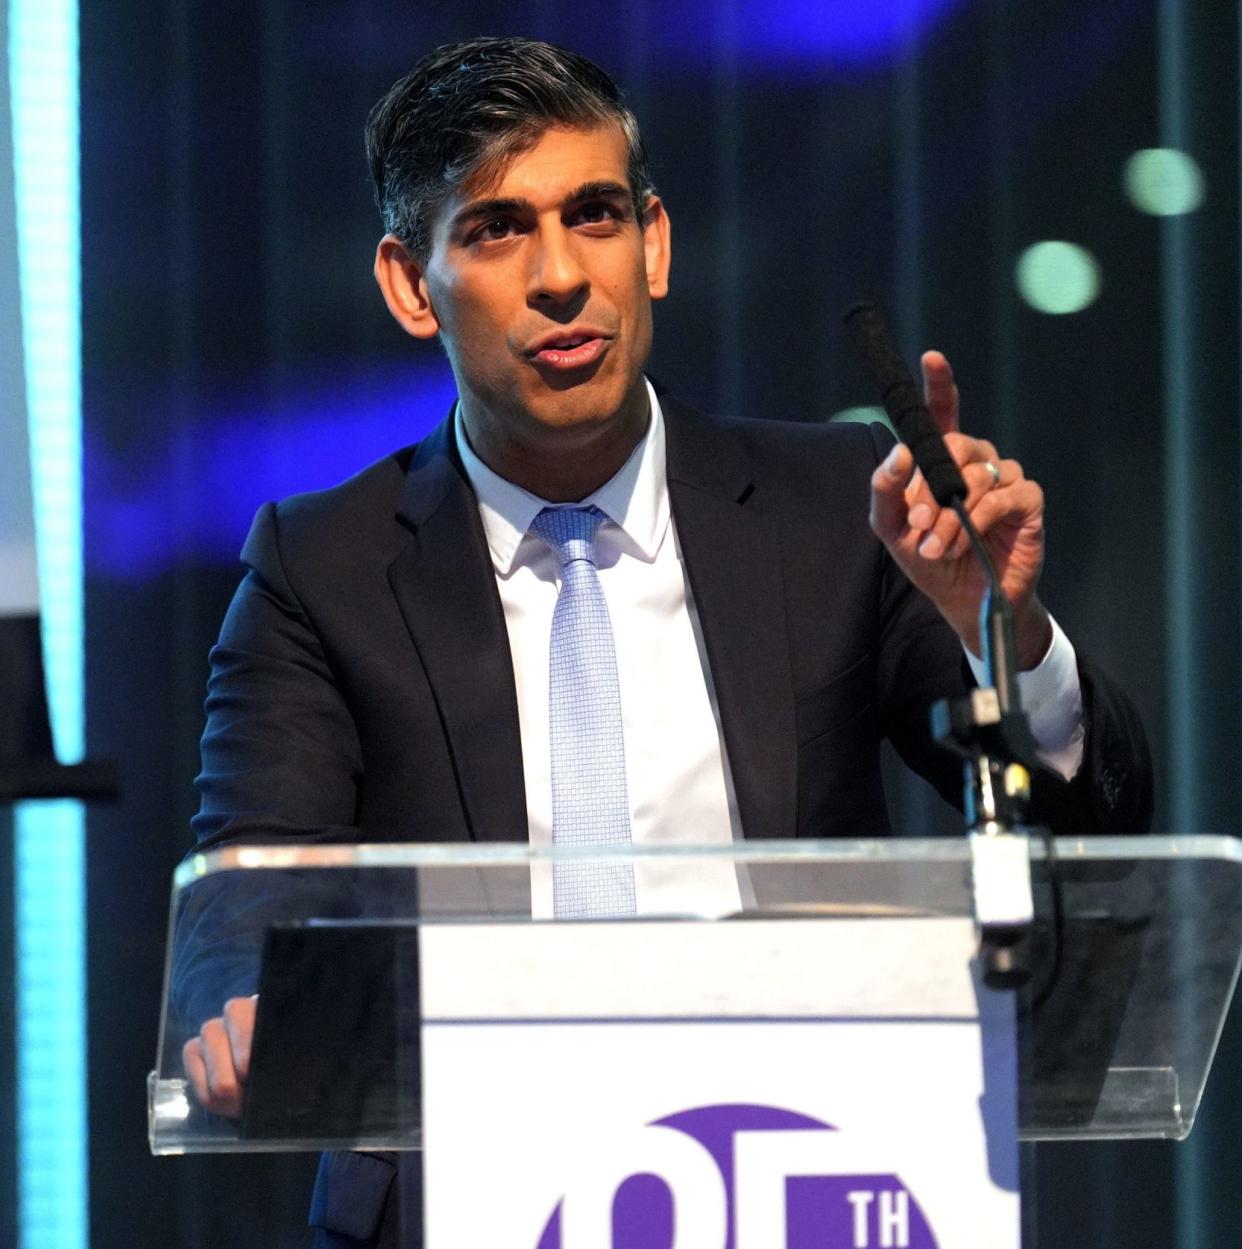 Rishi Sunak, the Prime Minister, addresses the Society of Editors' 25th anniversary conference in London